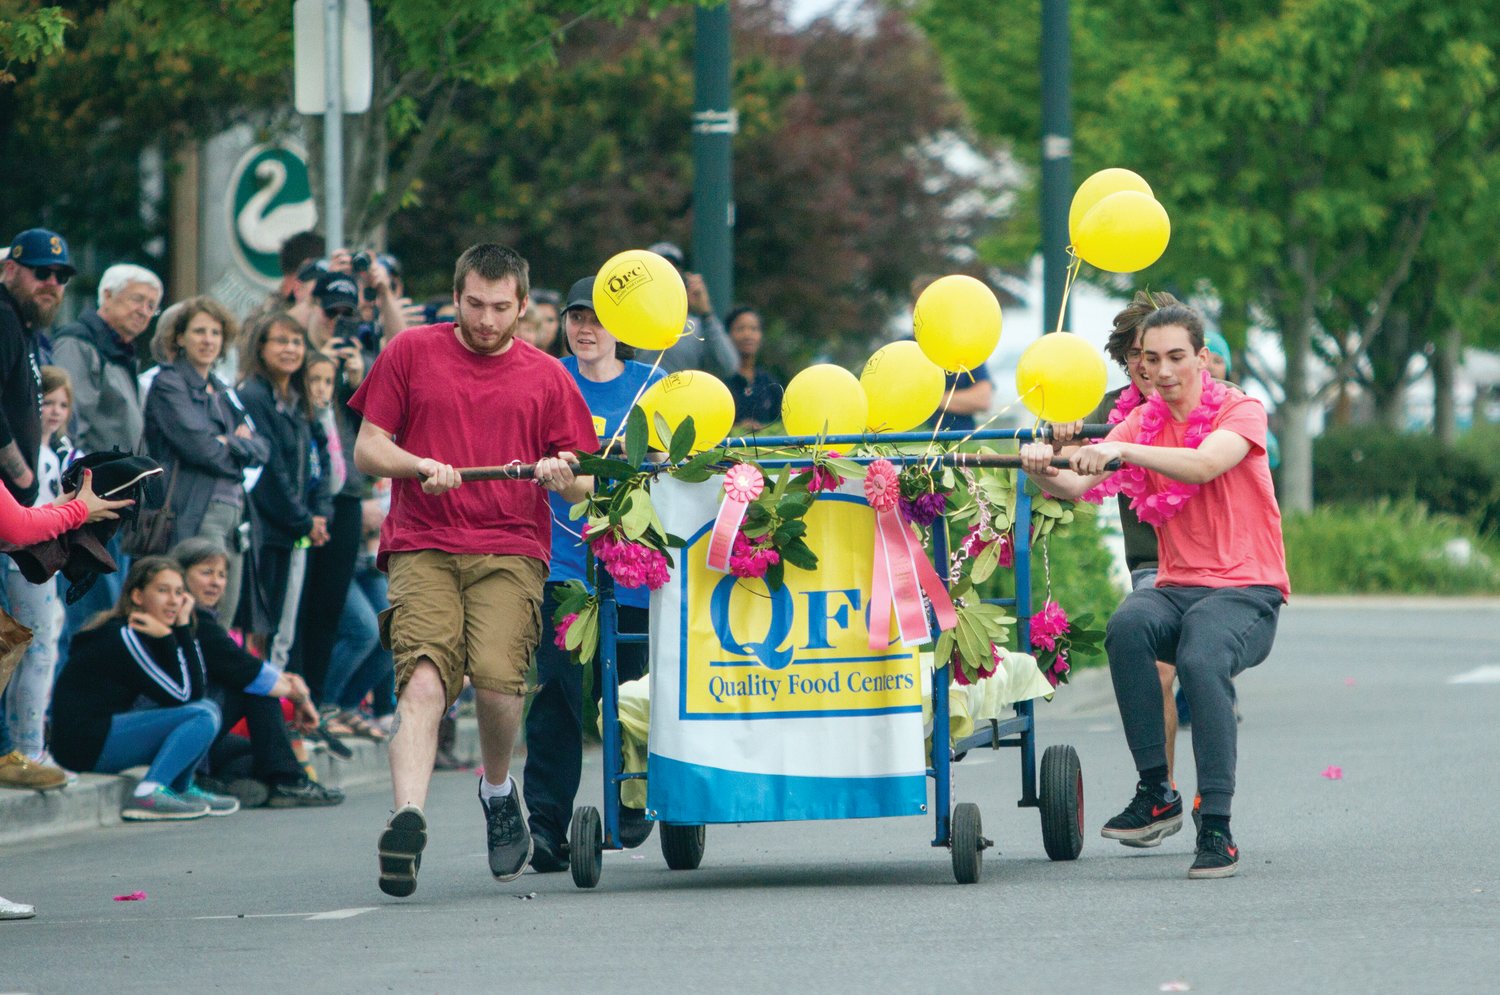 A team from QFC competes in the Bed Races during the 2018 Rhody Festival.